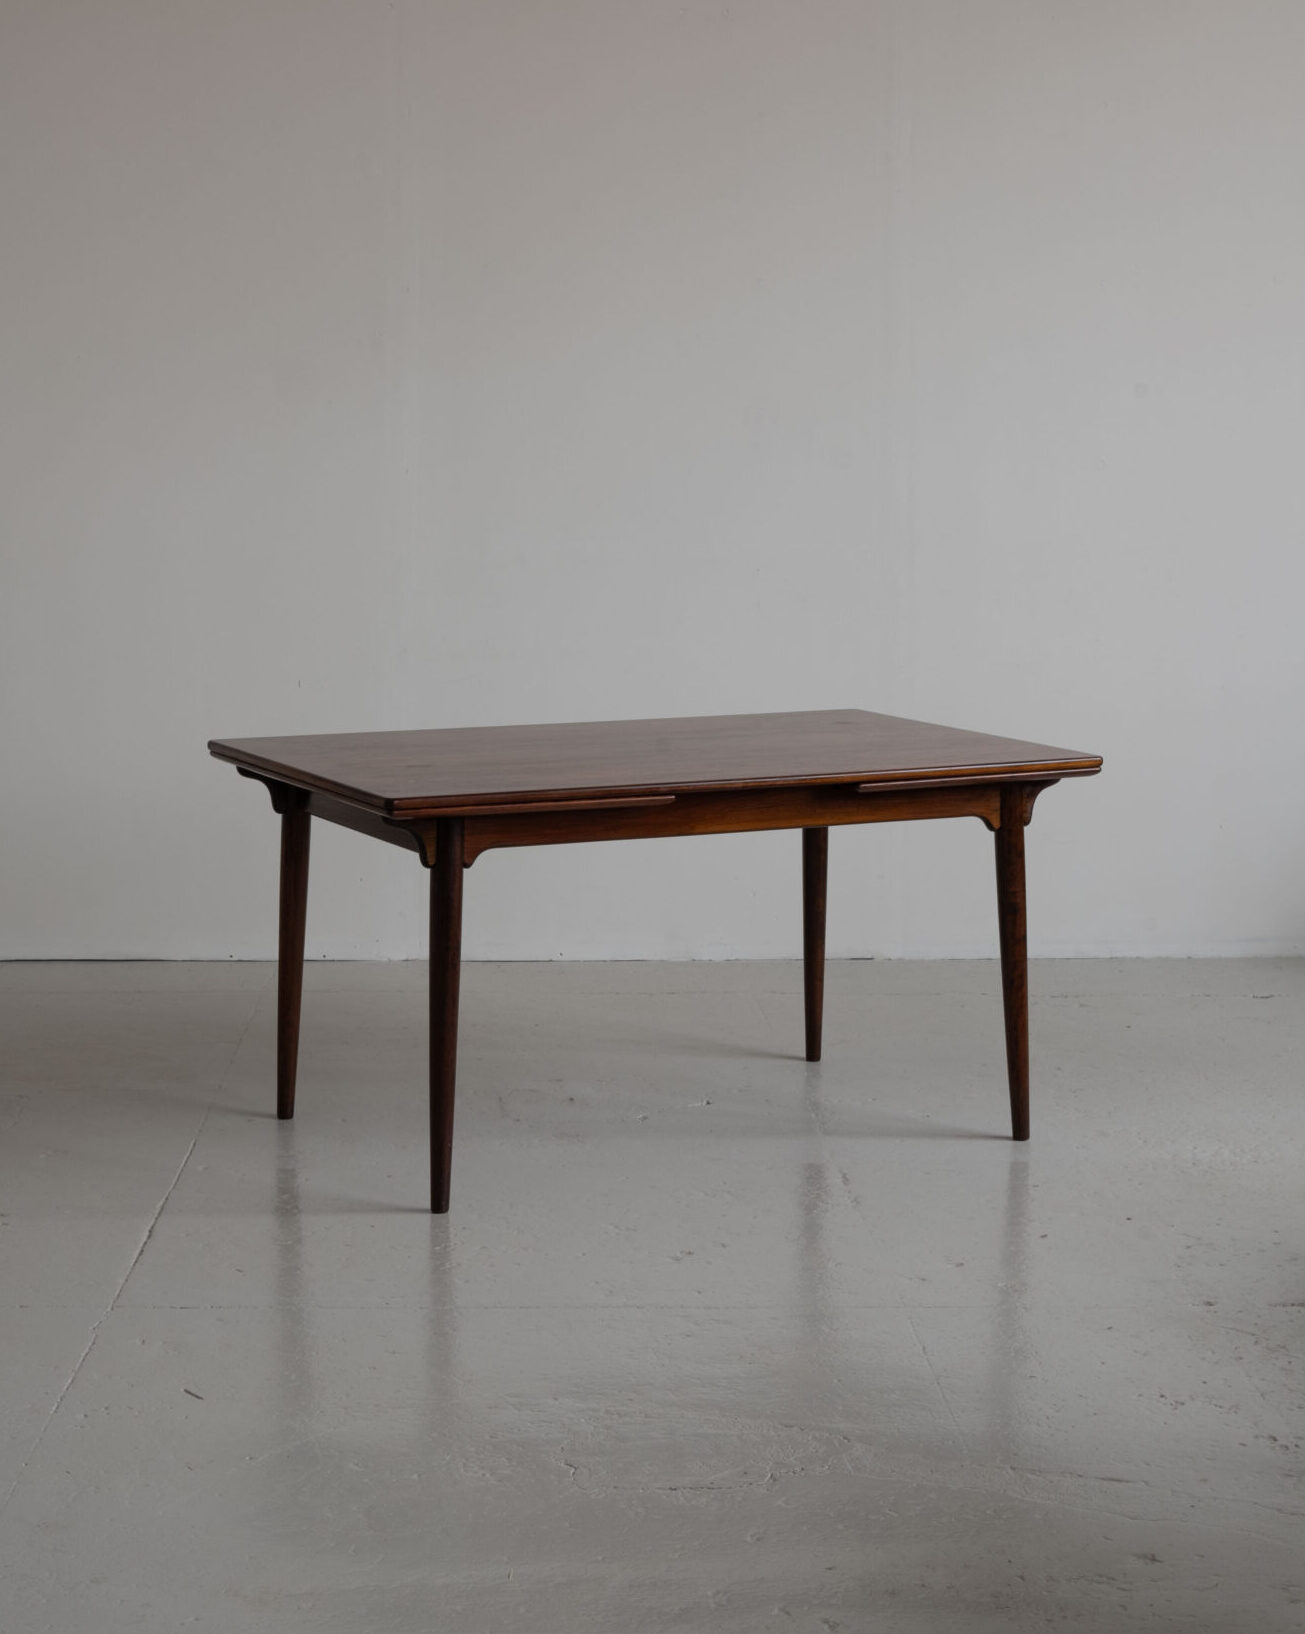 [RESERVED] Omann Jun dining table, model no. 54